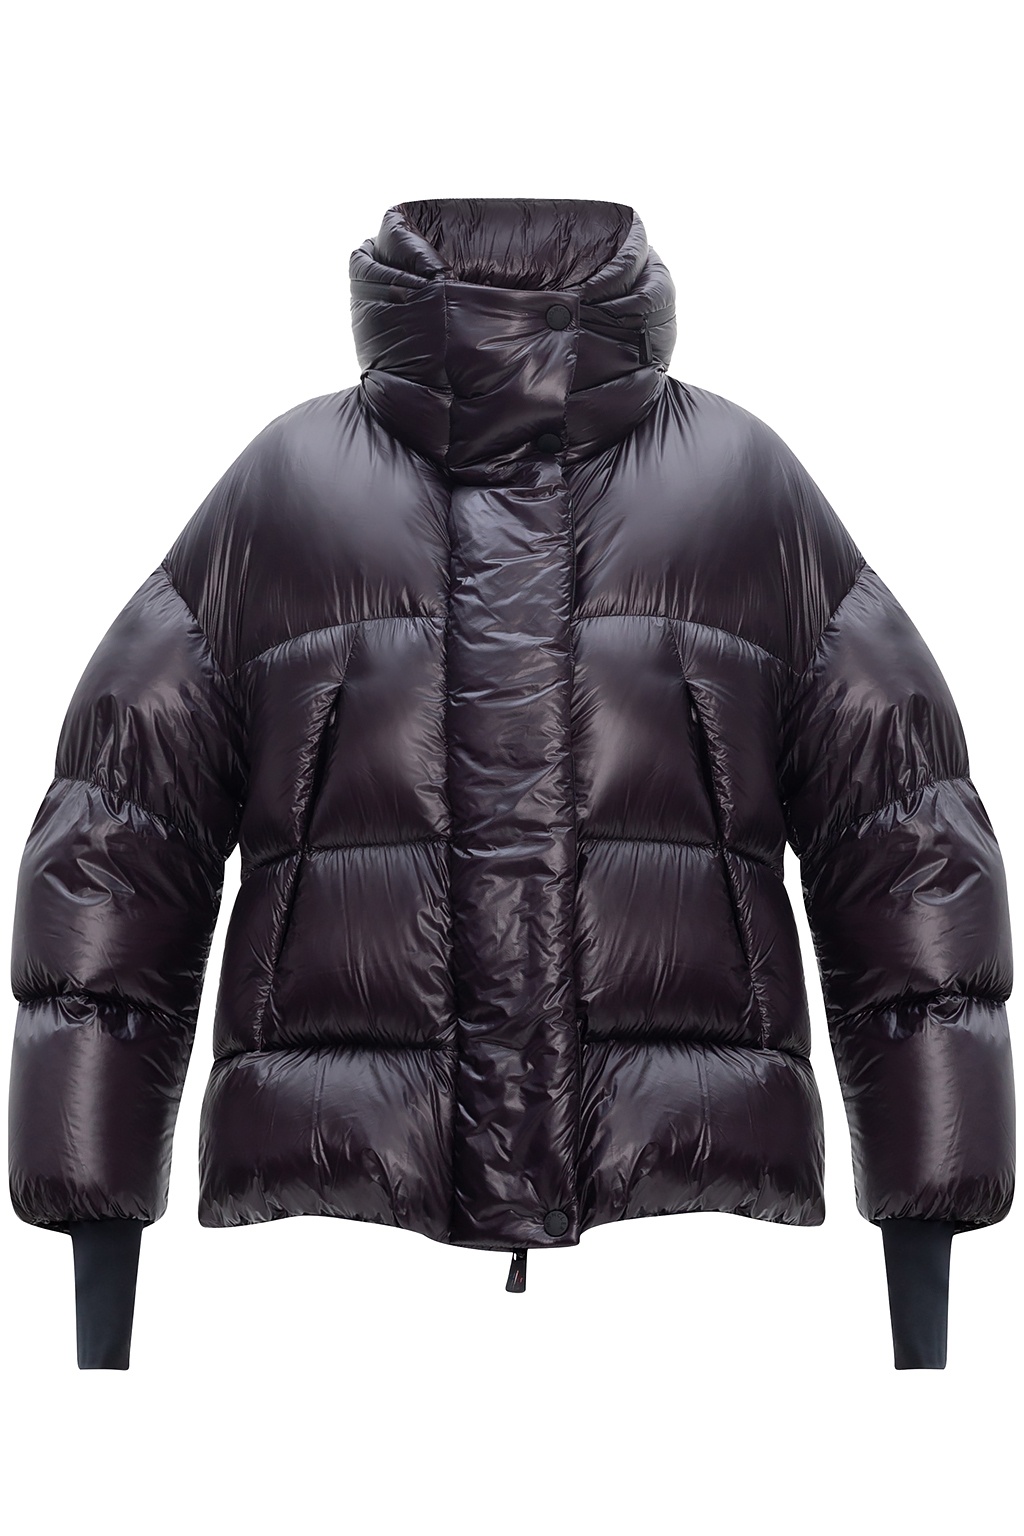 Moncler Grenoble 'Arpuilles' down jacket with hood | Women's